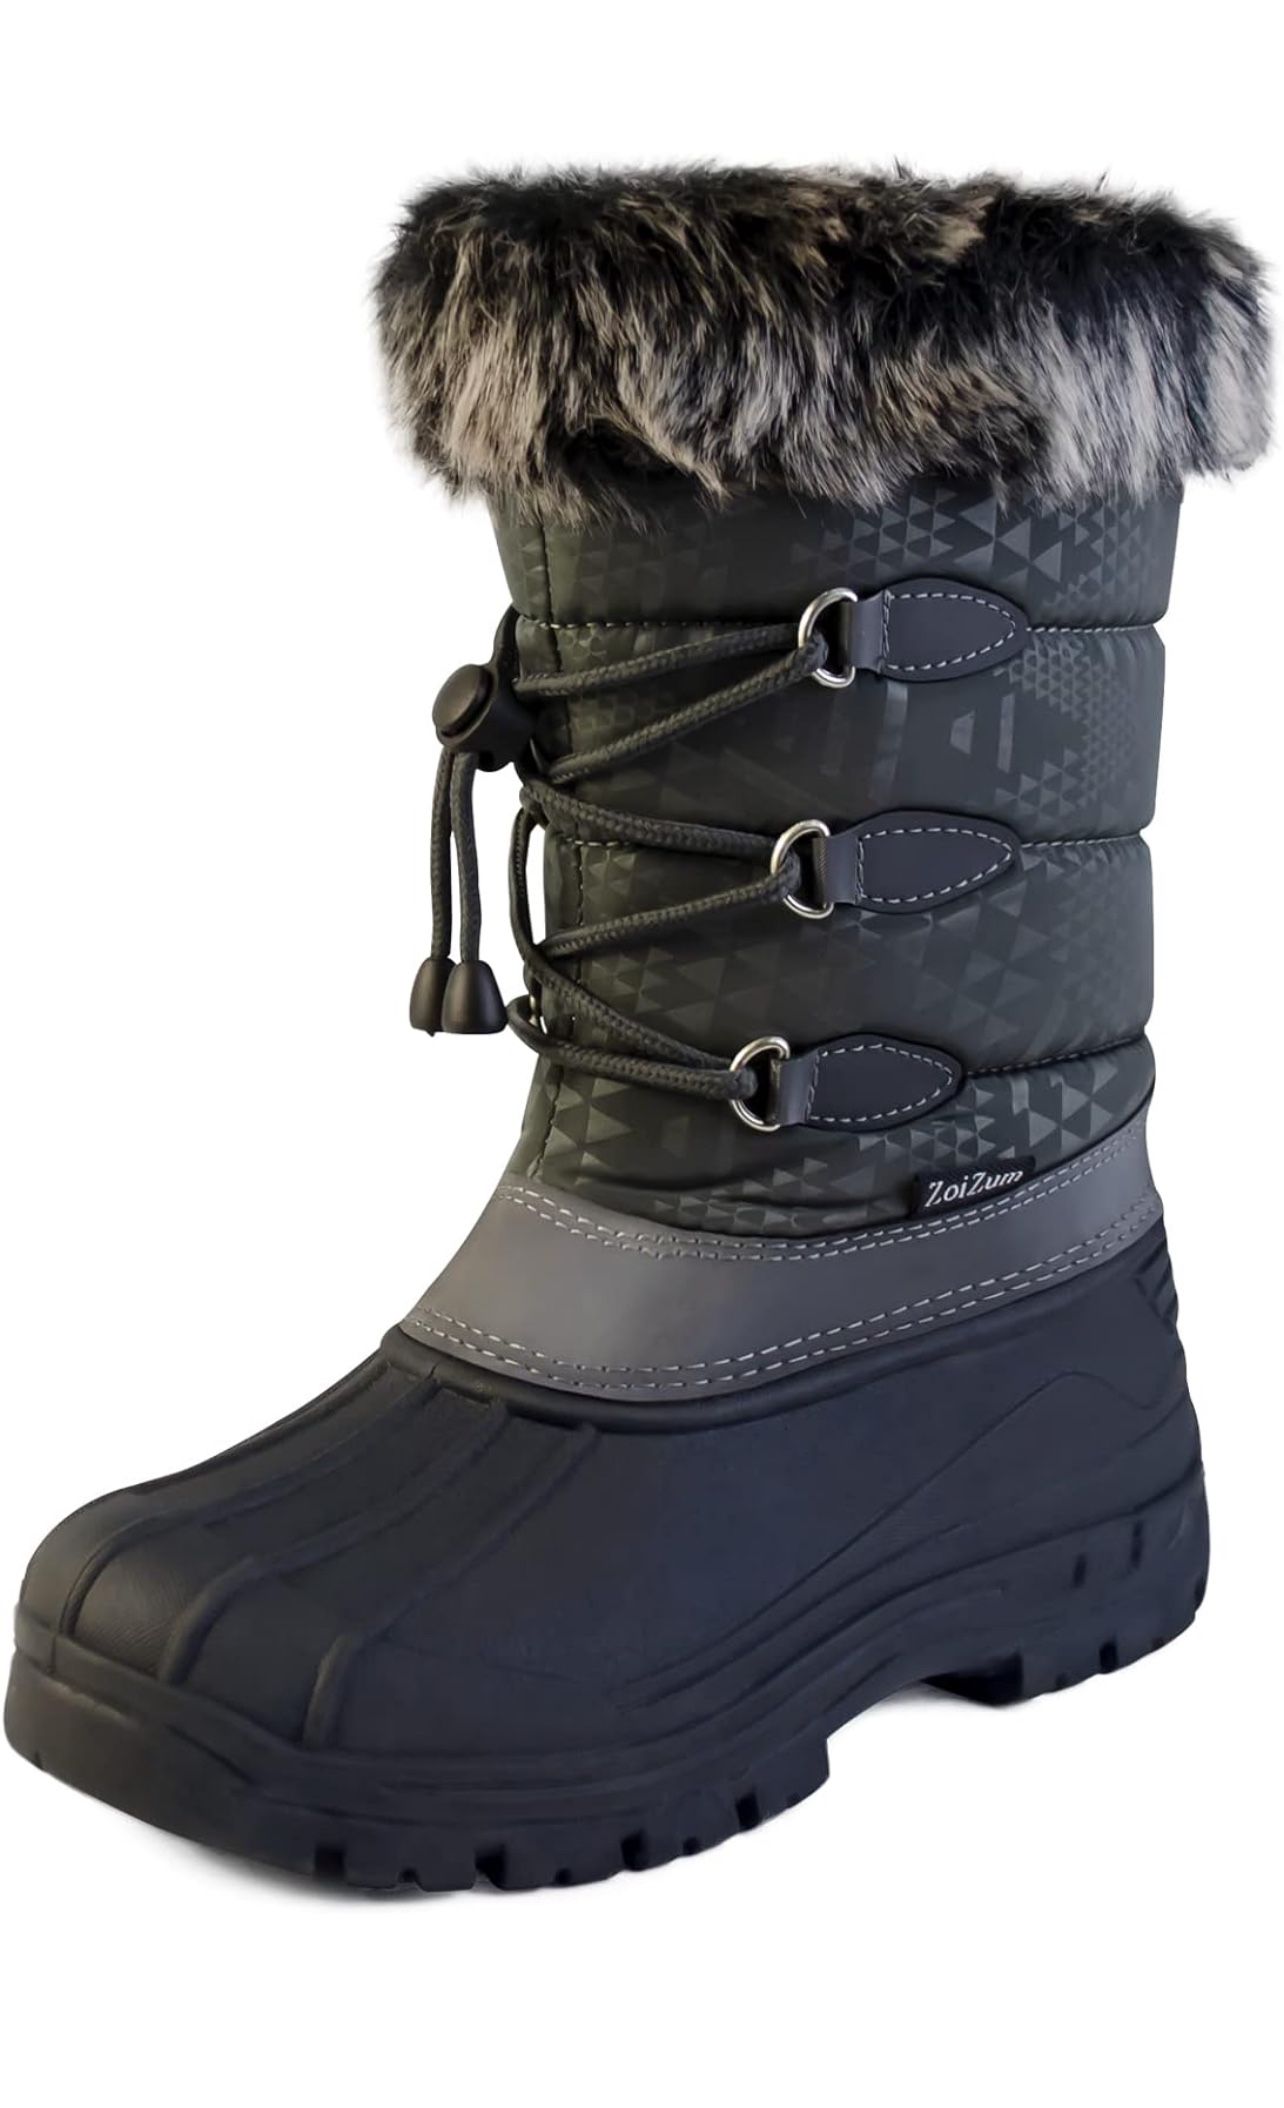 Women's Snow Boots Warm Faux Fur Lined Winter Mid-Calf Boots Waterproof Outdoor Cold Boots for Women